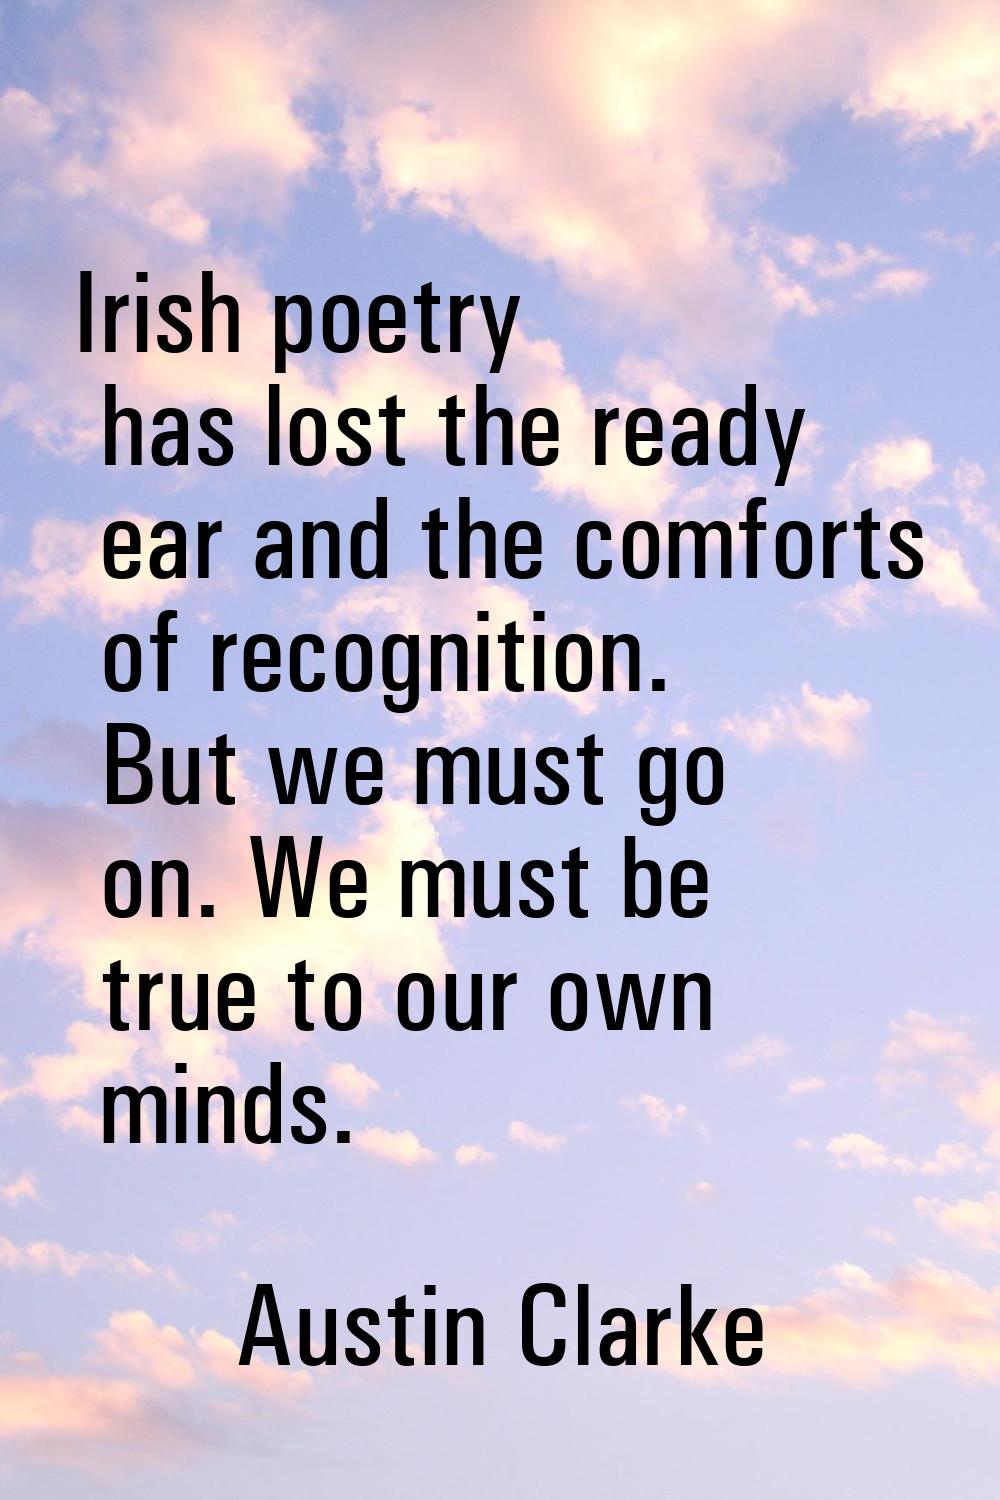 Irish poetry has lost the ready ear and the comforts of recognition. But we must go on. We must be 